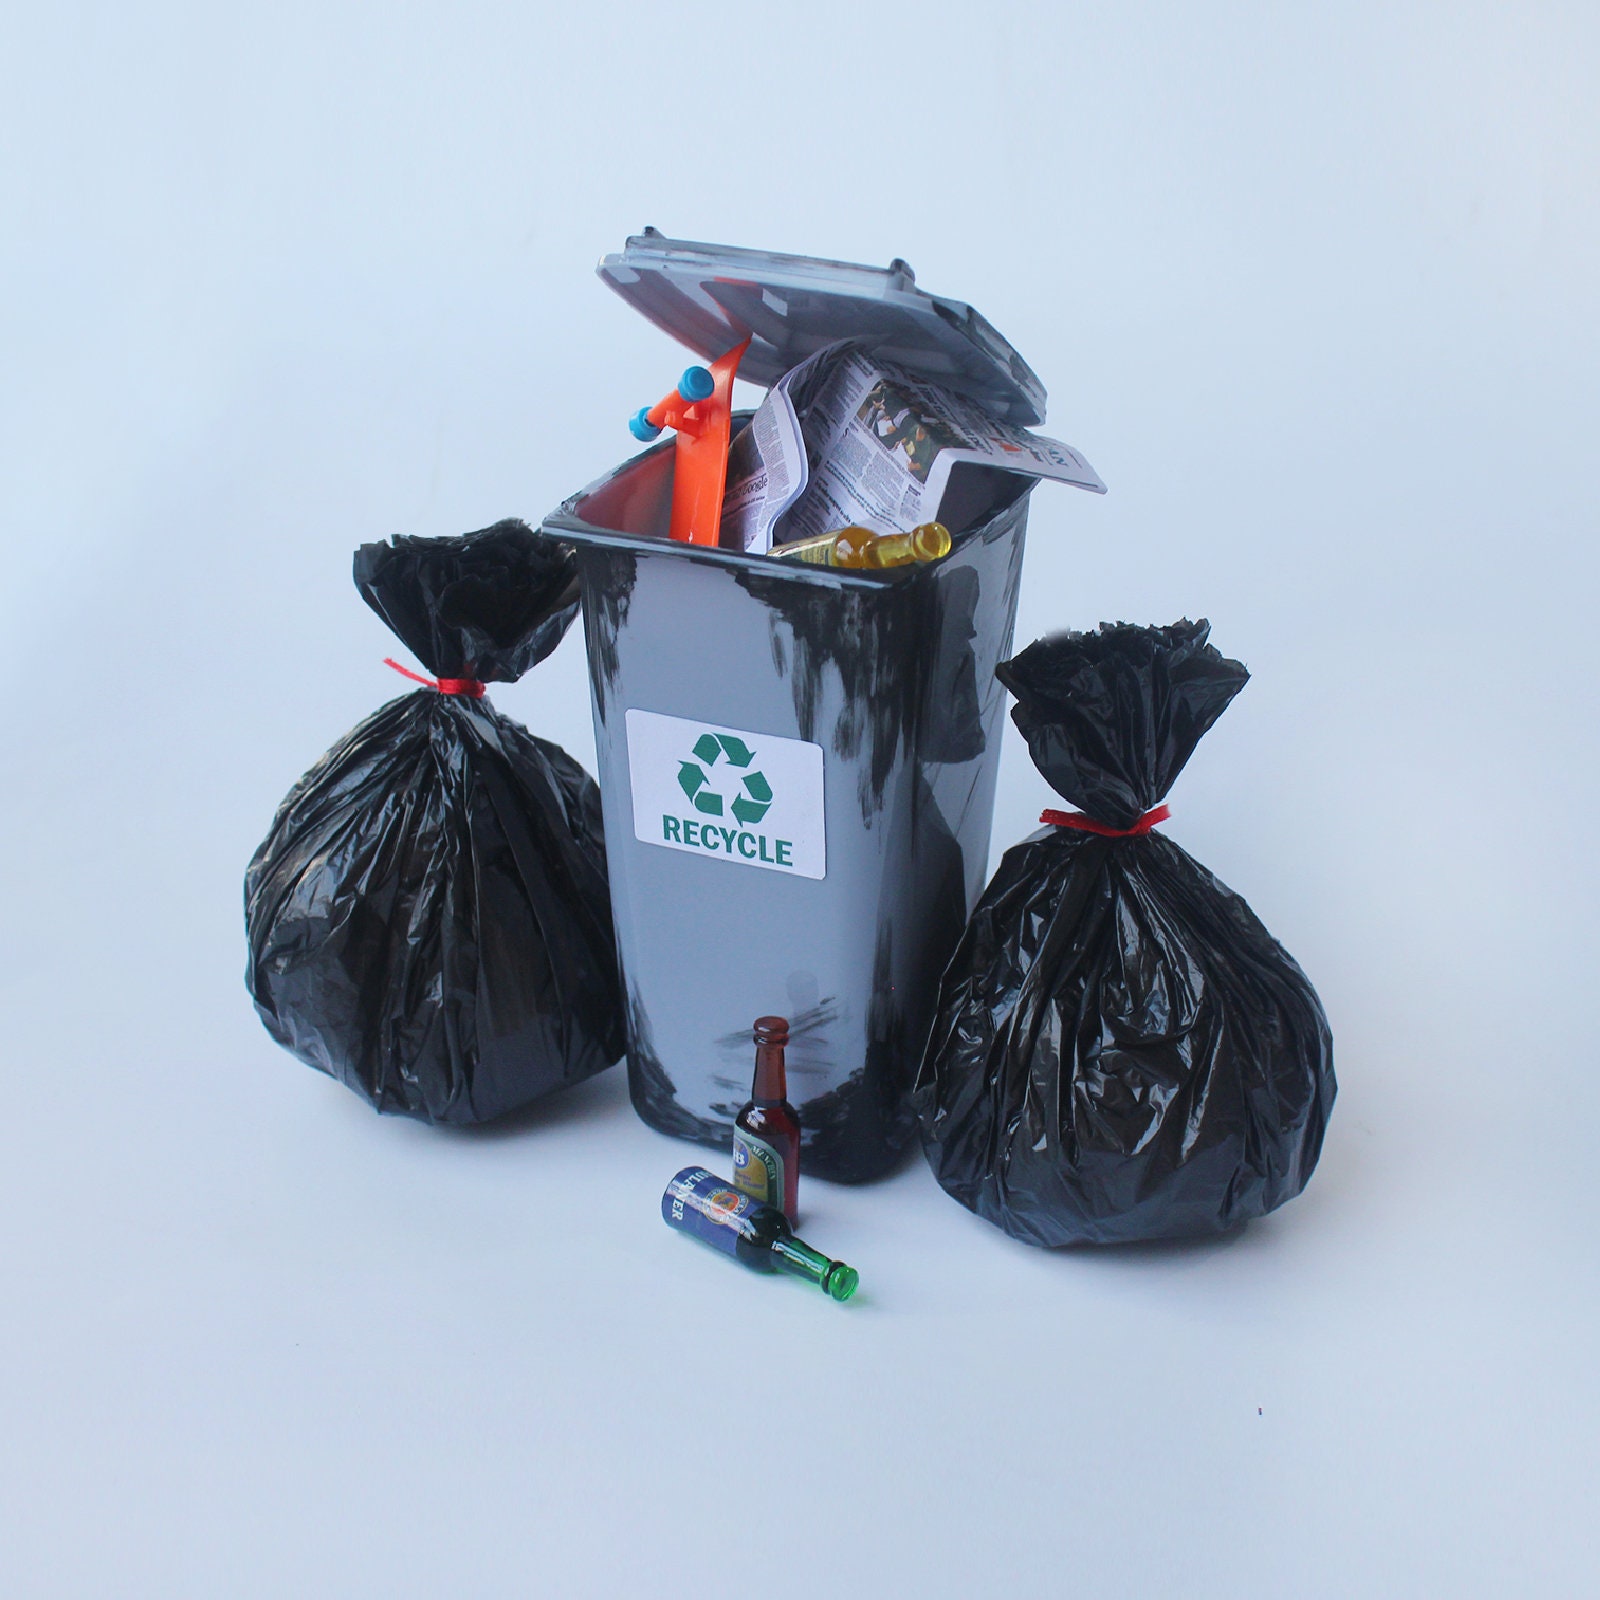 How to Make MINIATURE TRASH BAGS easy! For Action figures, display